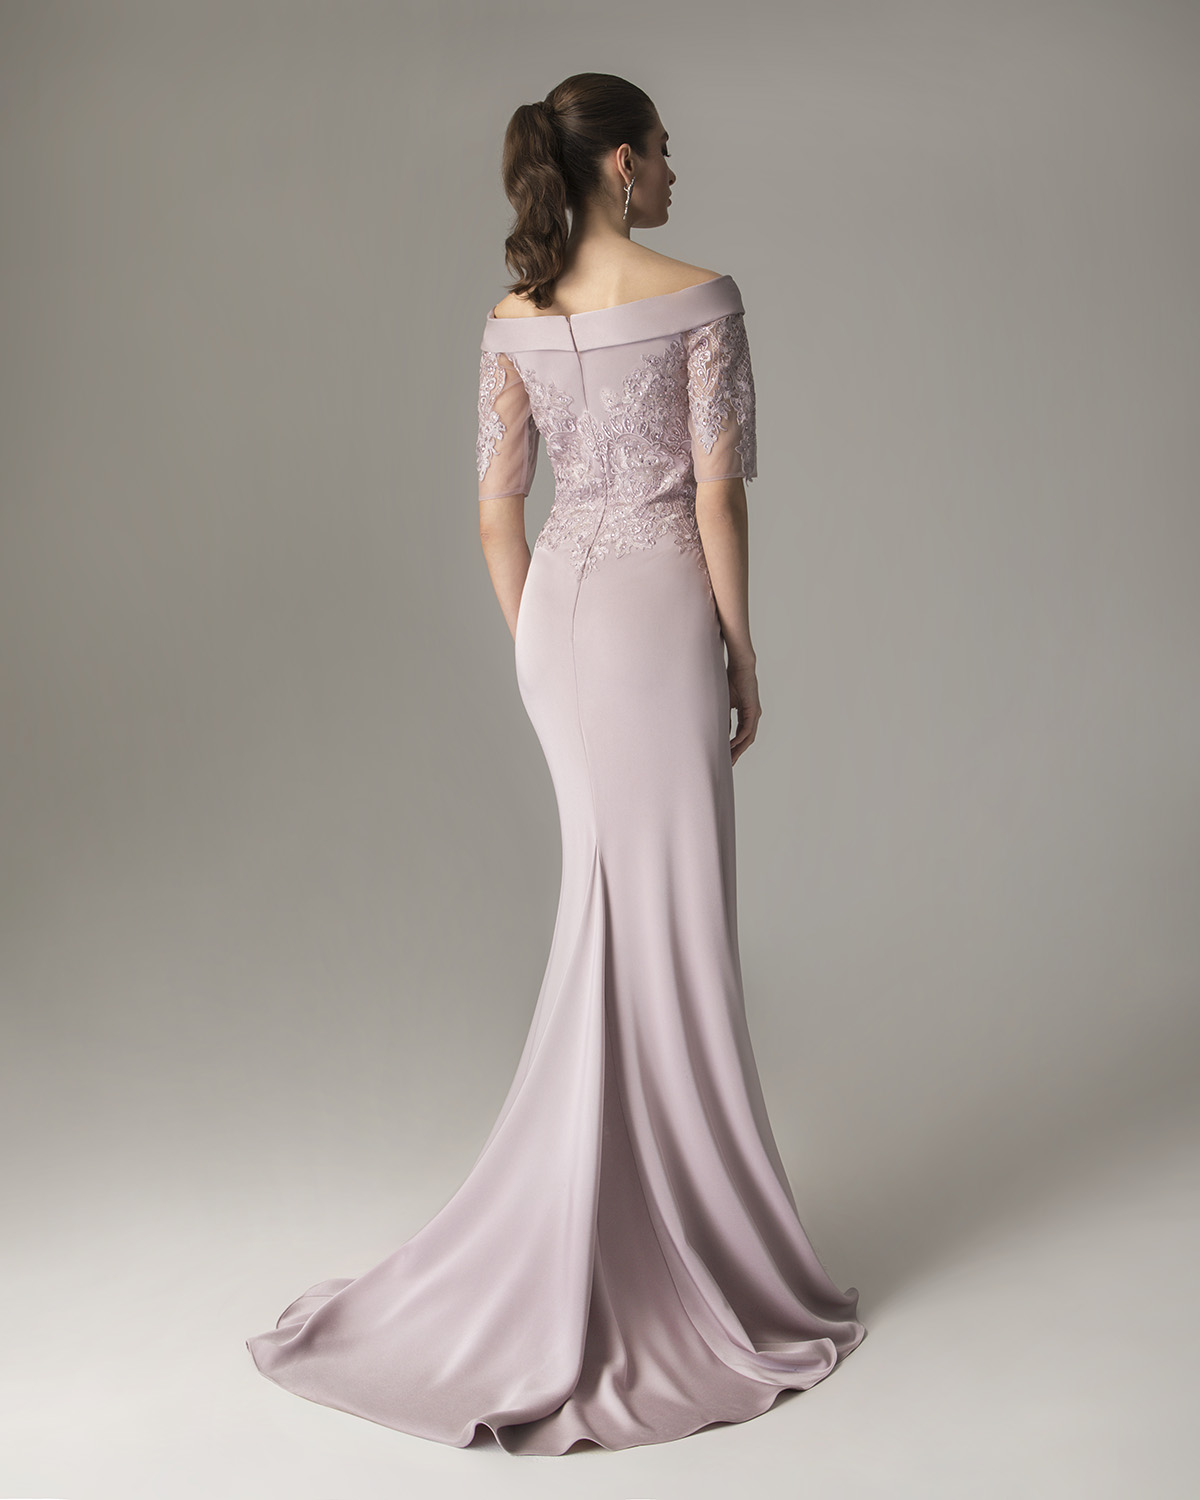 Classic Dresses / Long evening dress with lace top